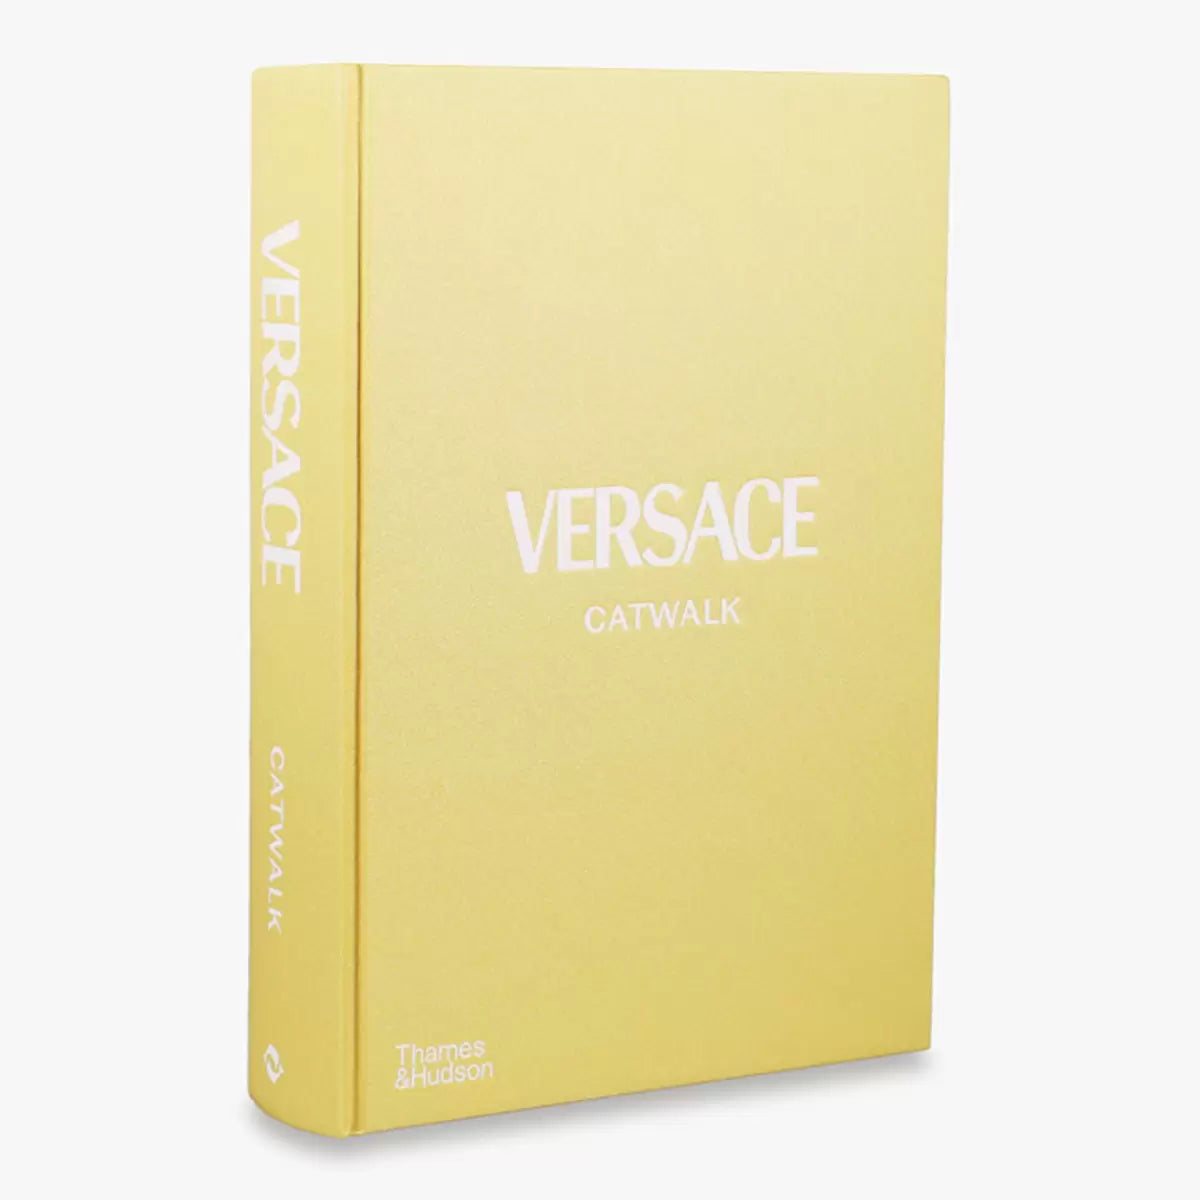 Versace Catwalk: The Complete Collections